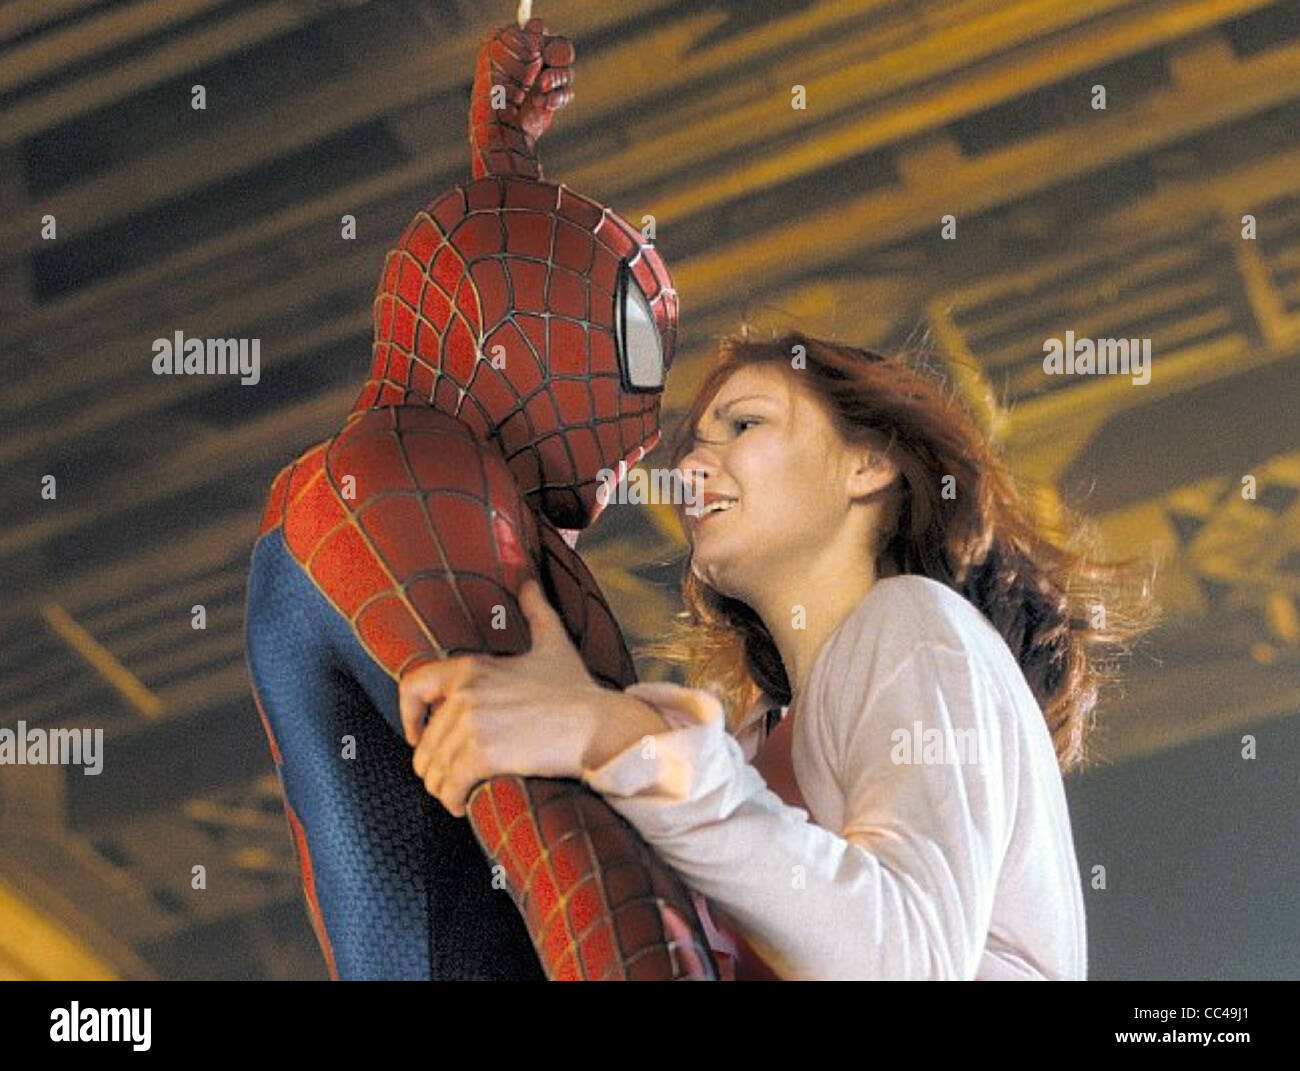 SPIDER-MAN  2002 Columbia TriStar/Marvel Enterprises film with Tobey Maguire and Kirsten Dunst Stock Photo